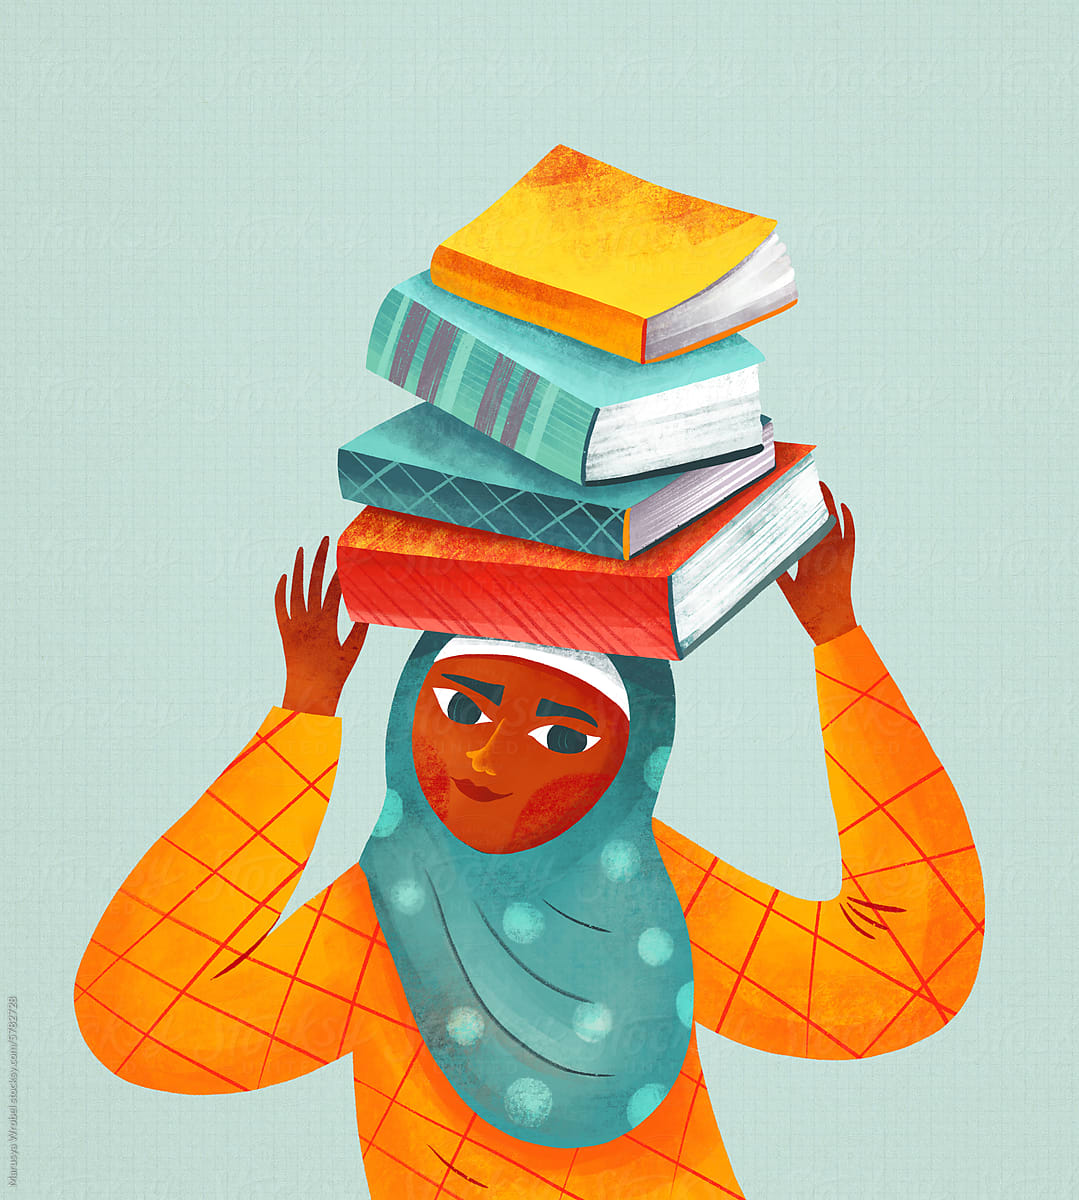 Muslim girl with books on her head